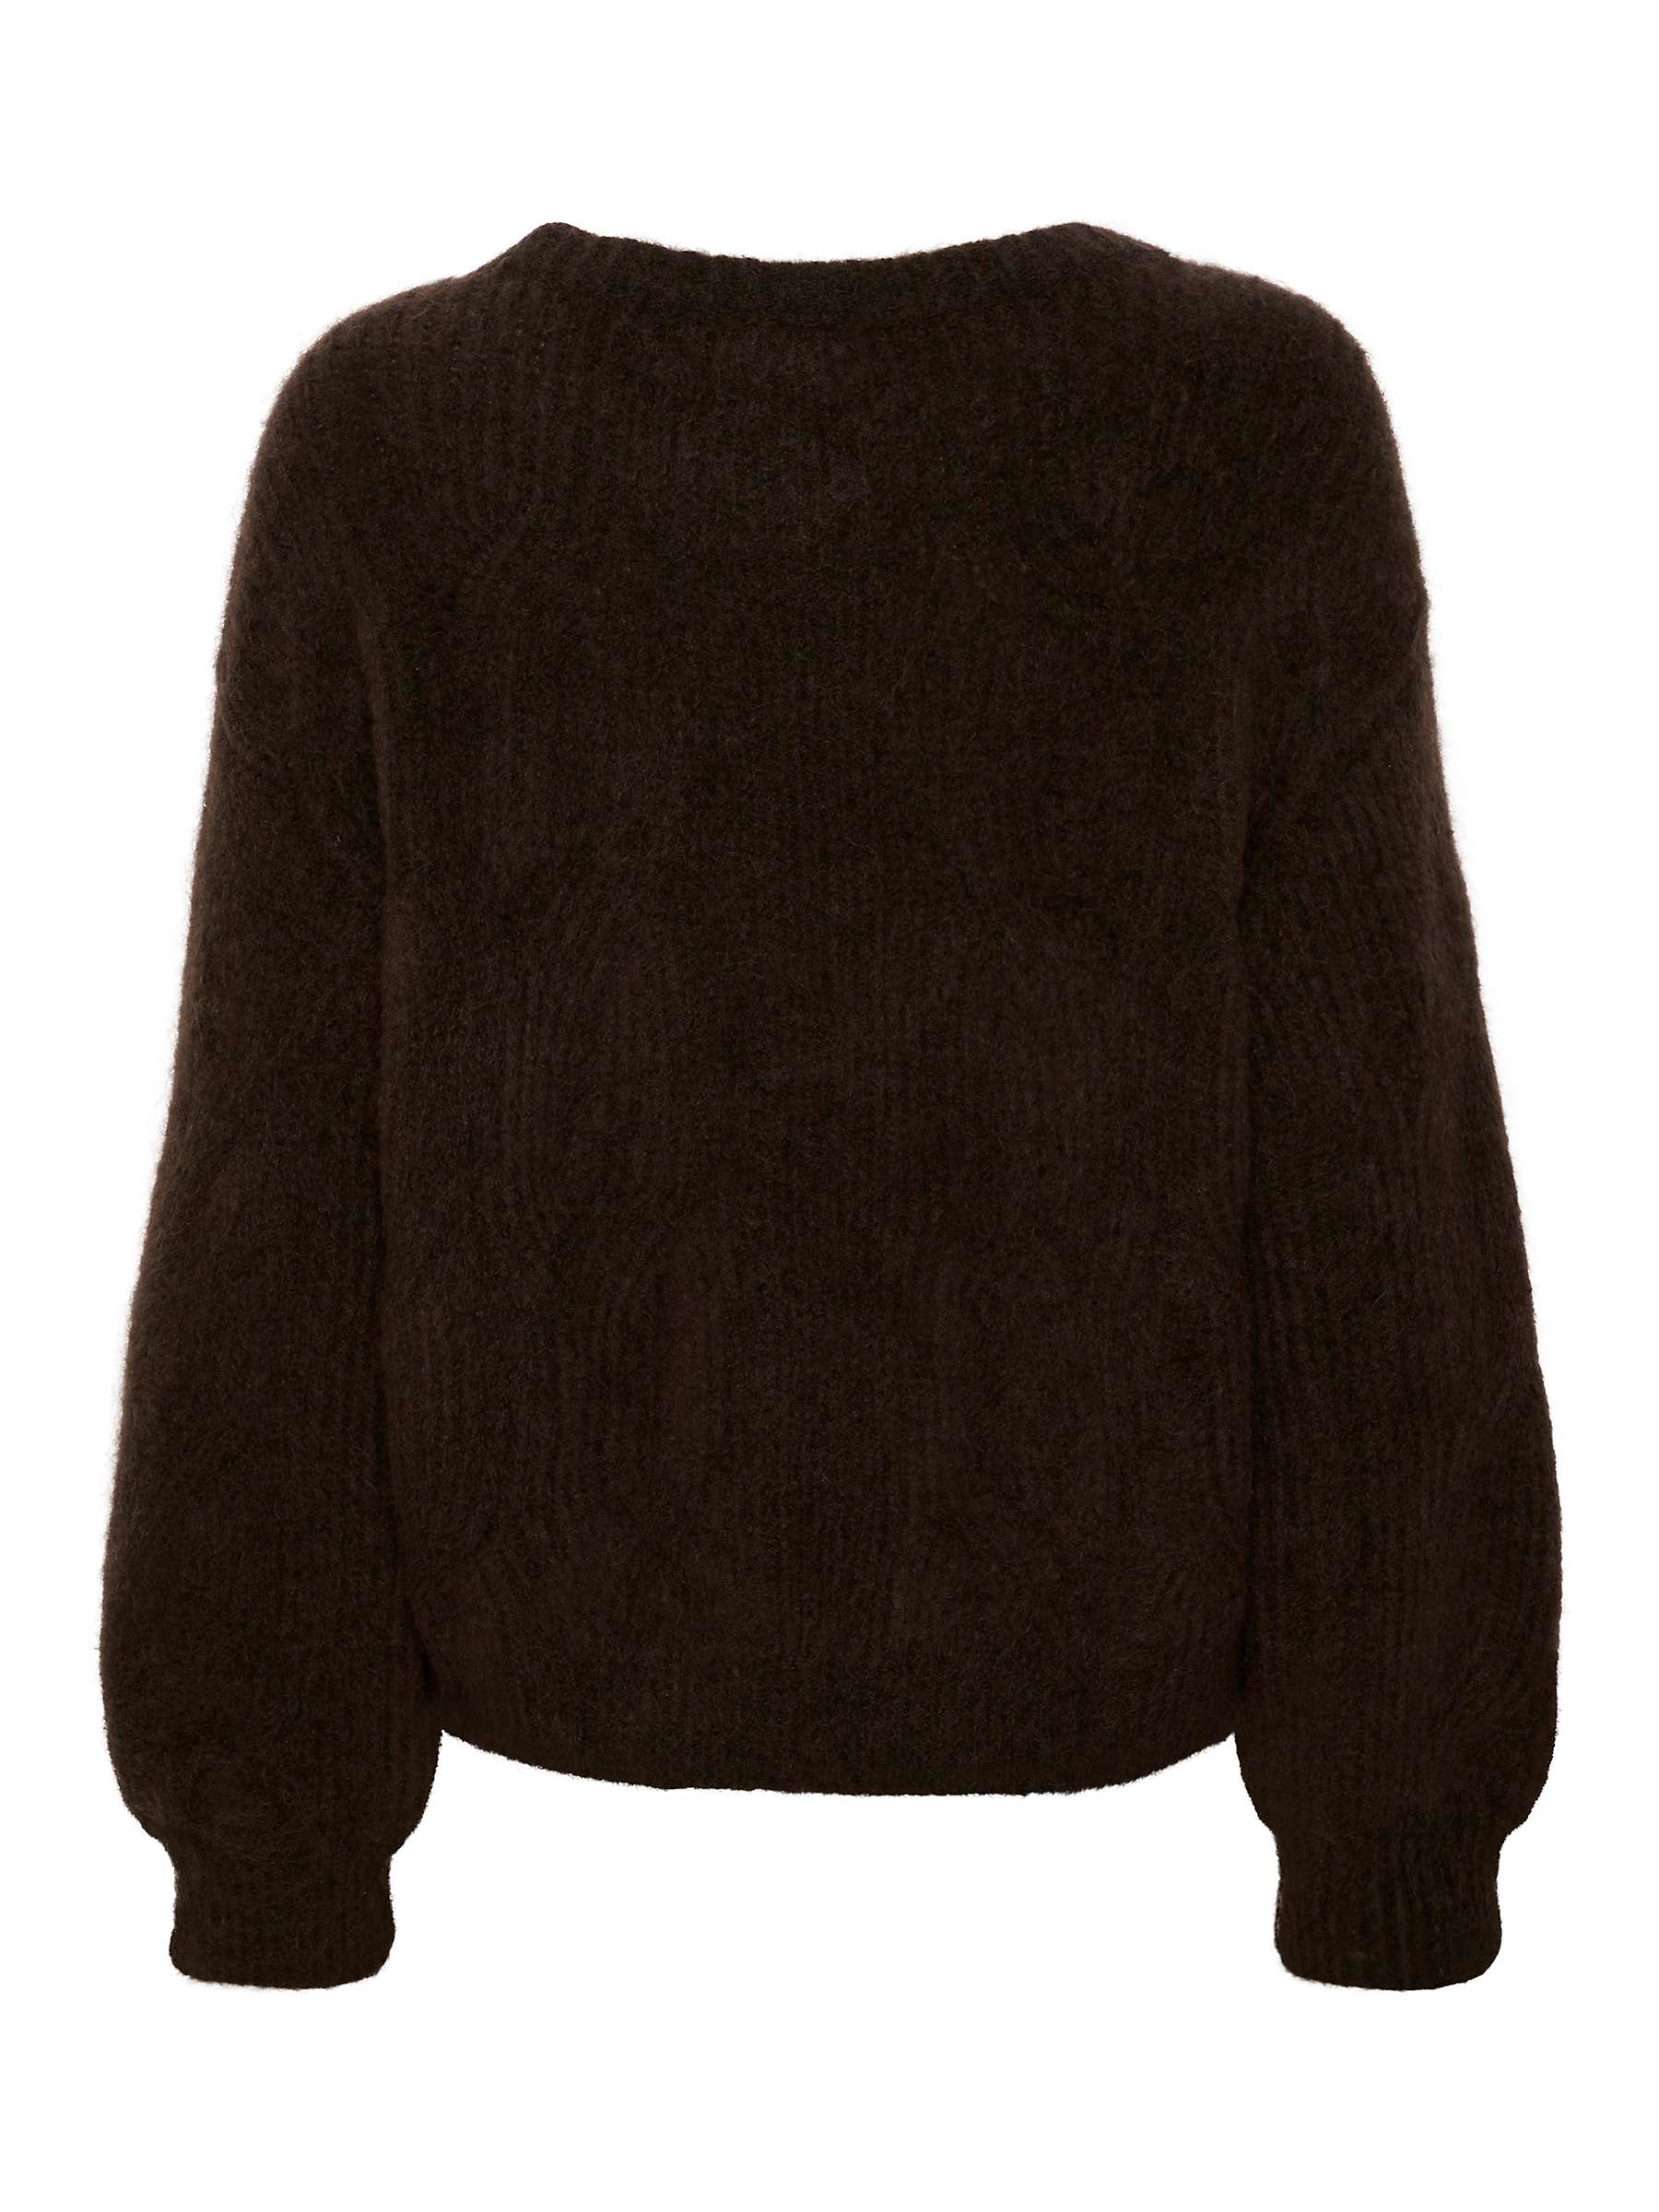 Buy Saint Tropez Arabella Cable Knit Loose Fit Jumper, Chocolate Brown Online at johnlewis.com